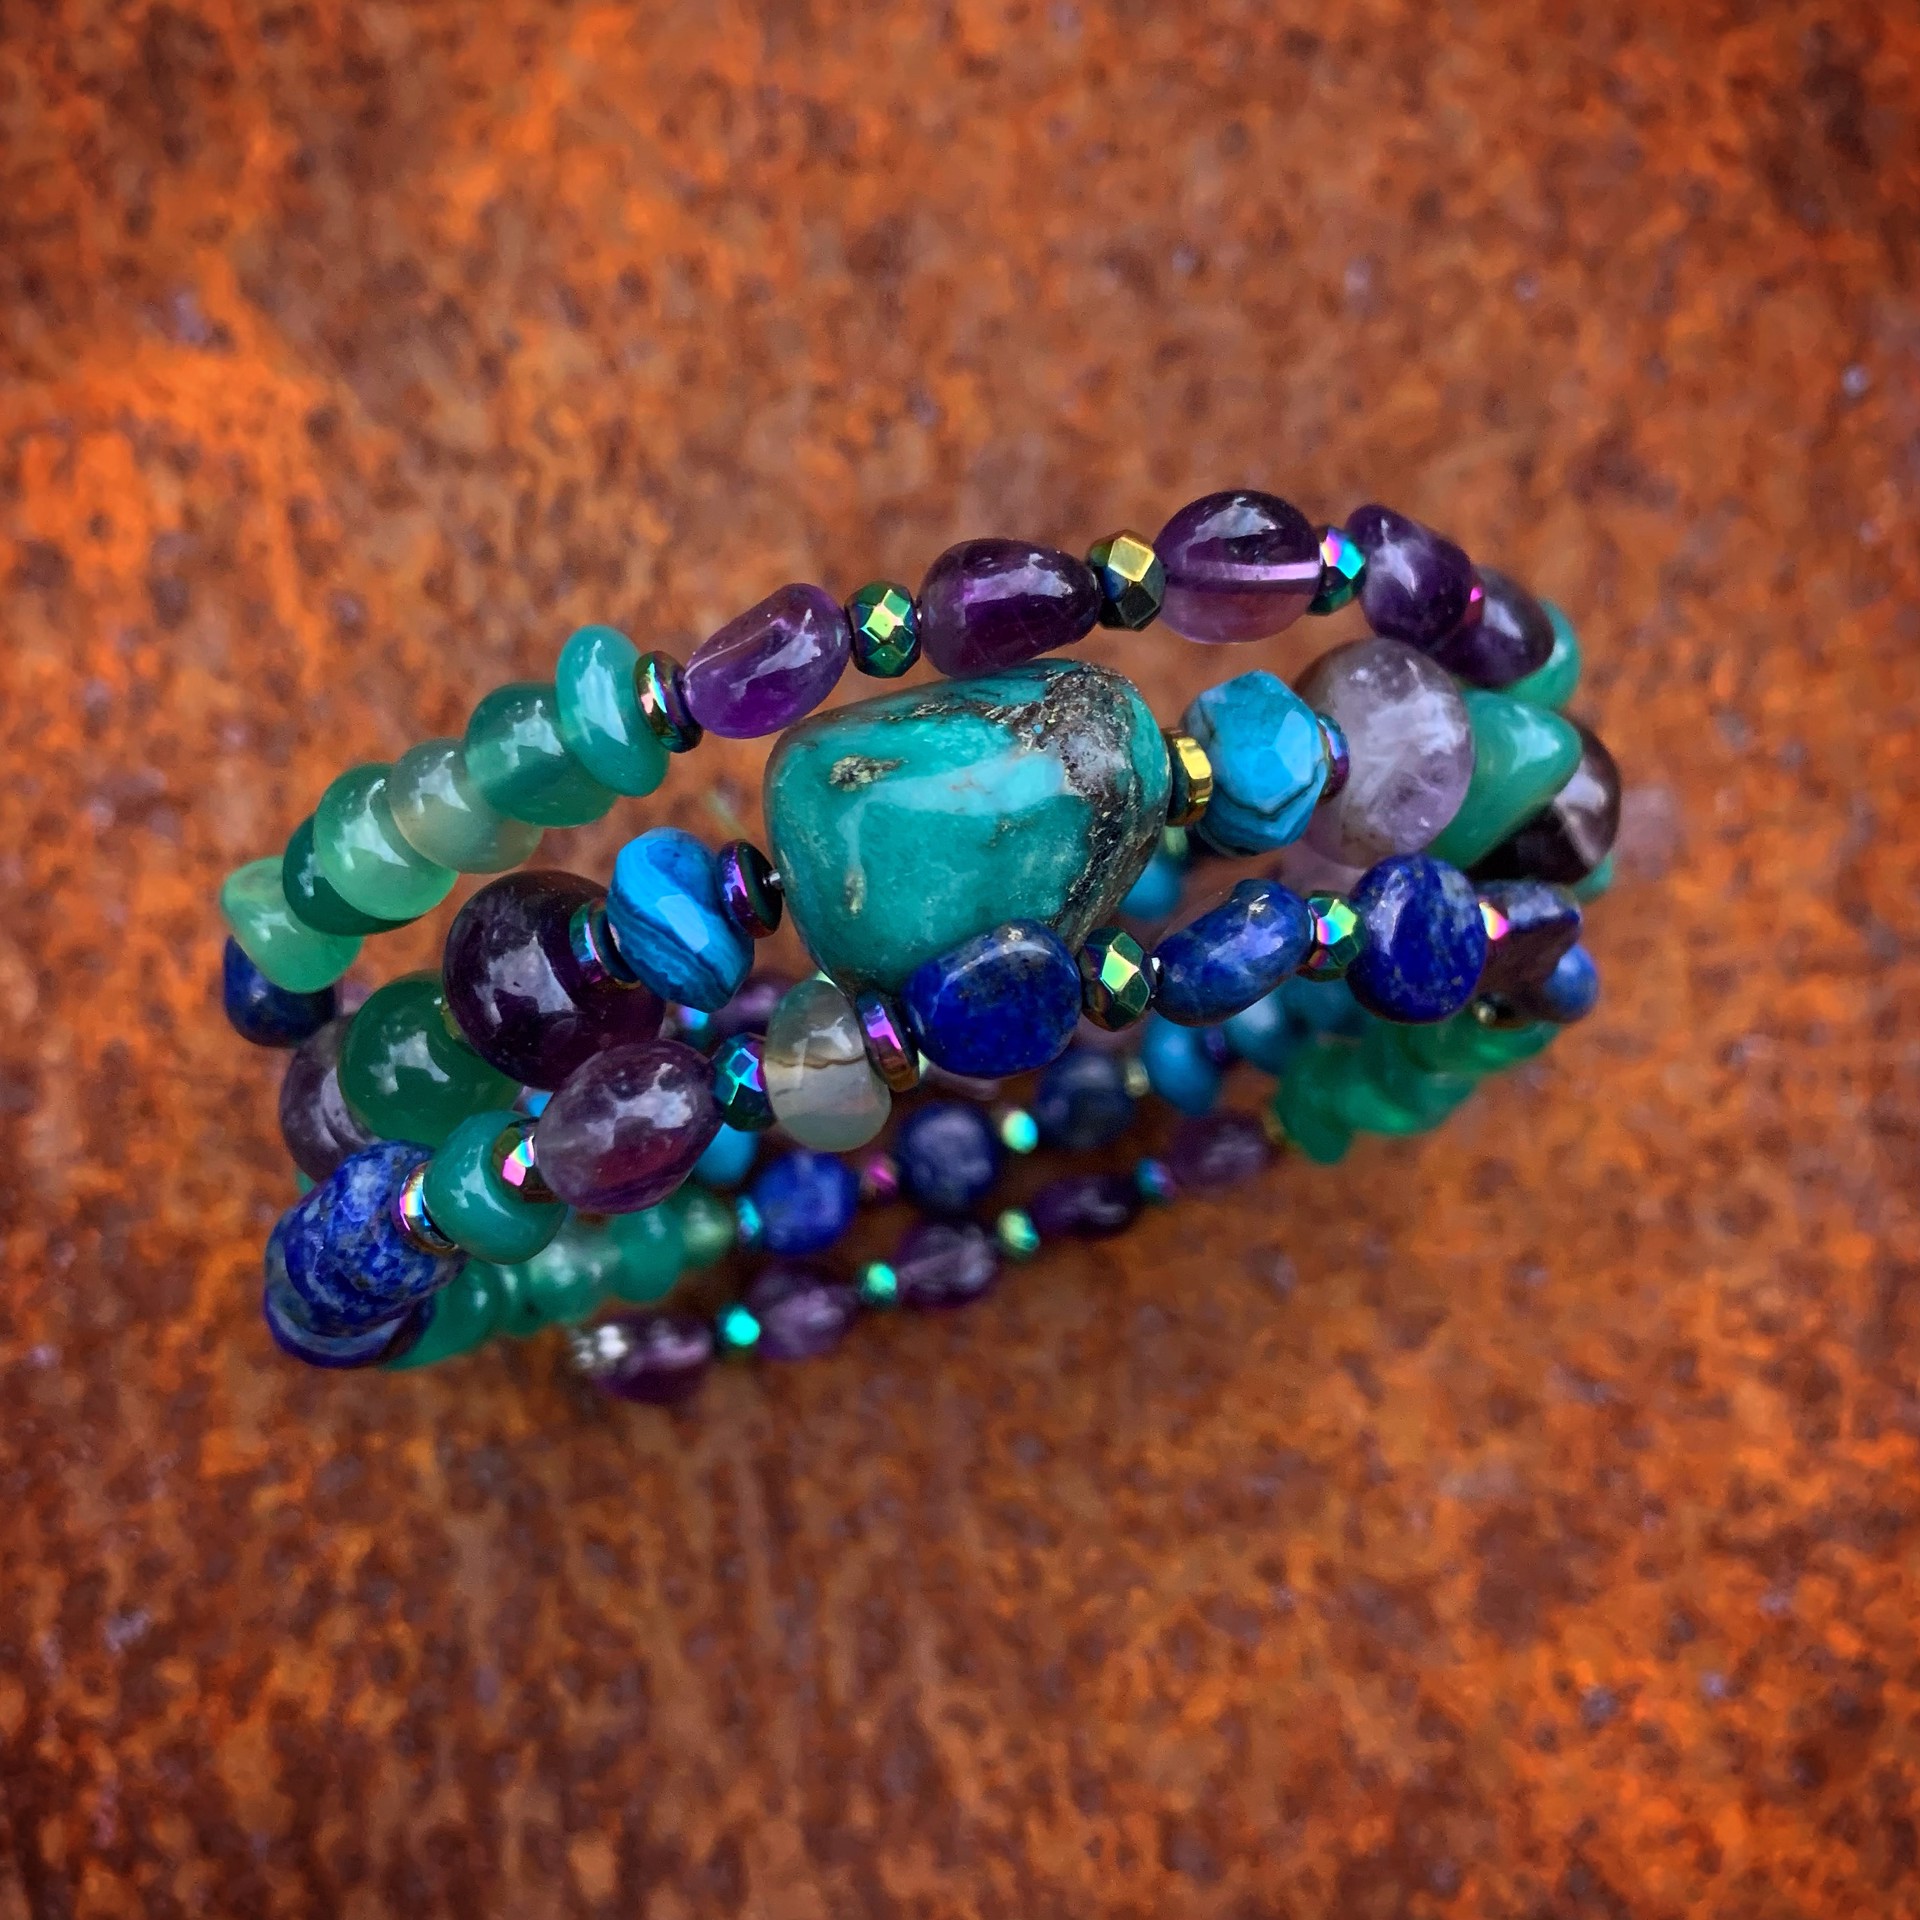 K623 Amethyst and Turquoise Bracelet by Kelly Ormsby